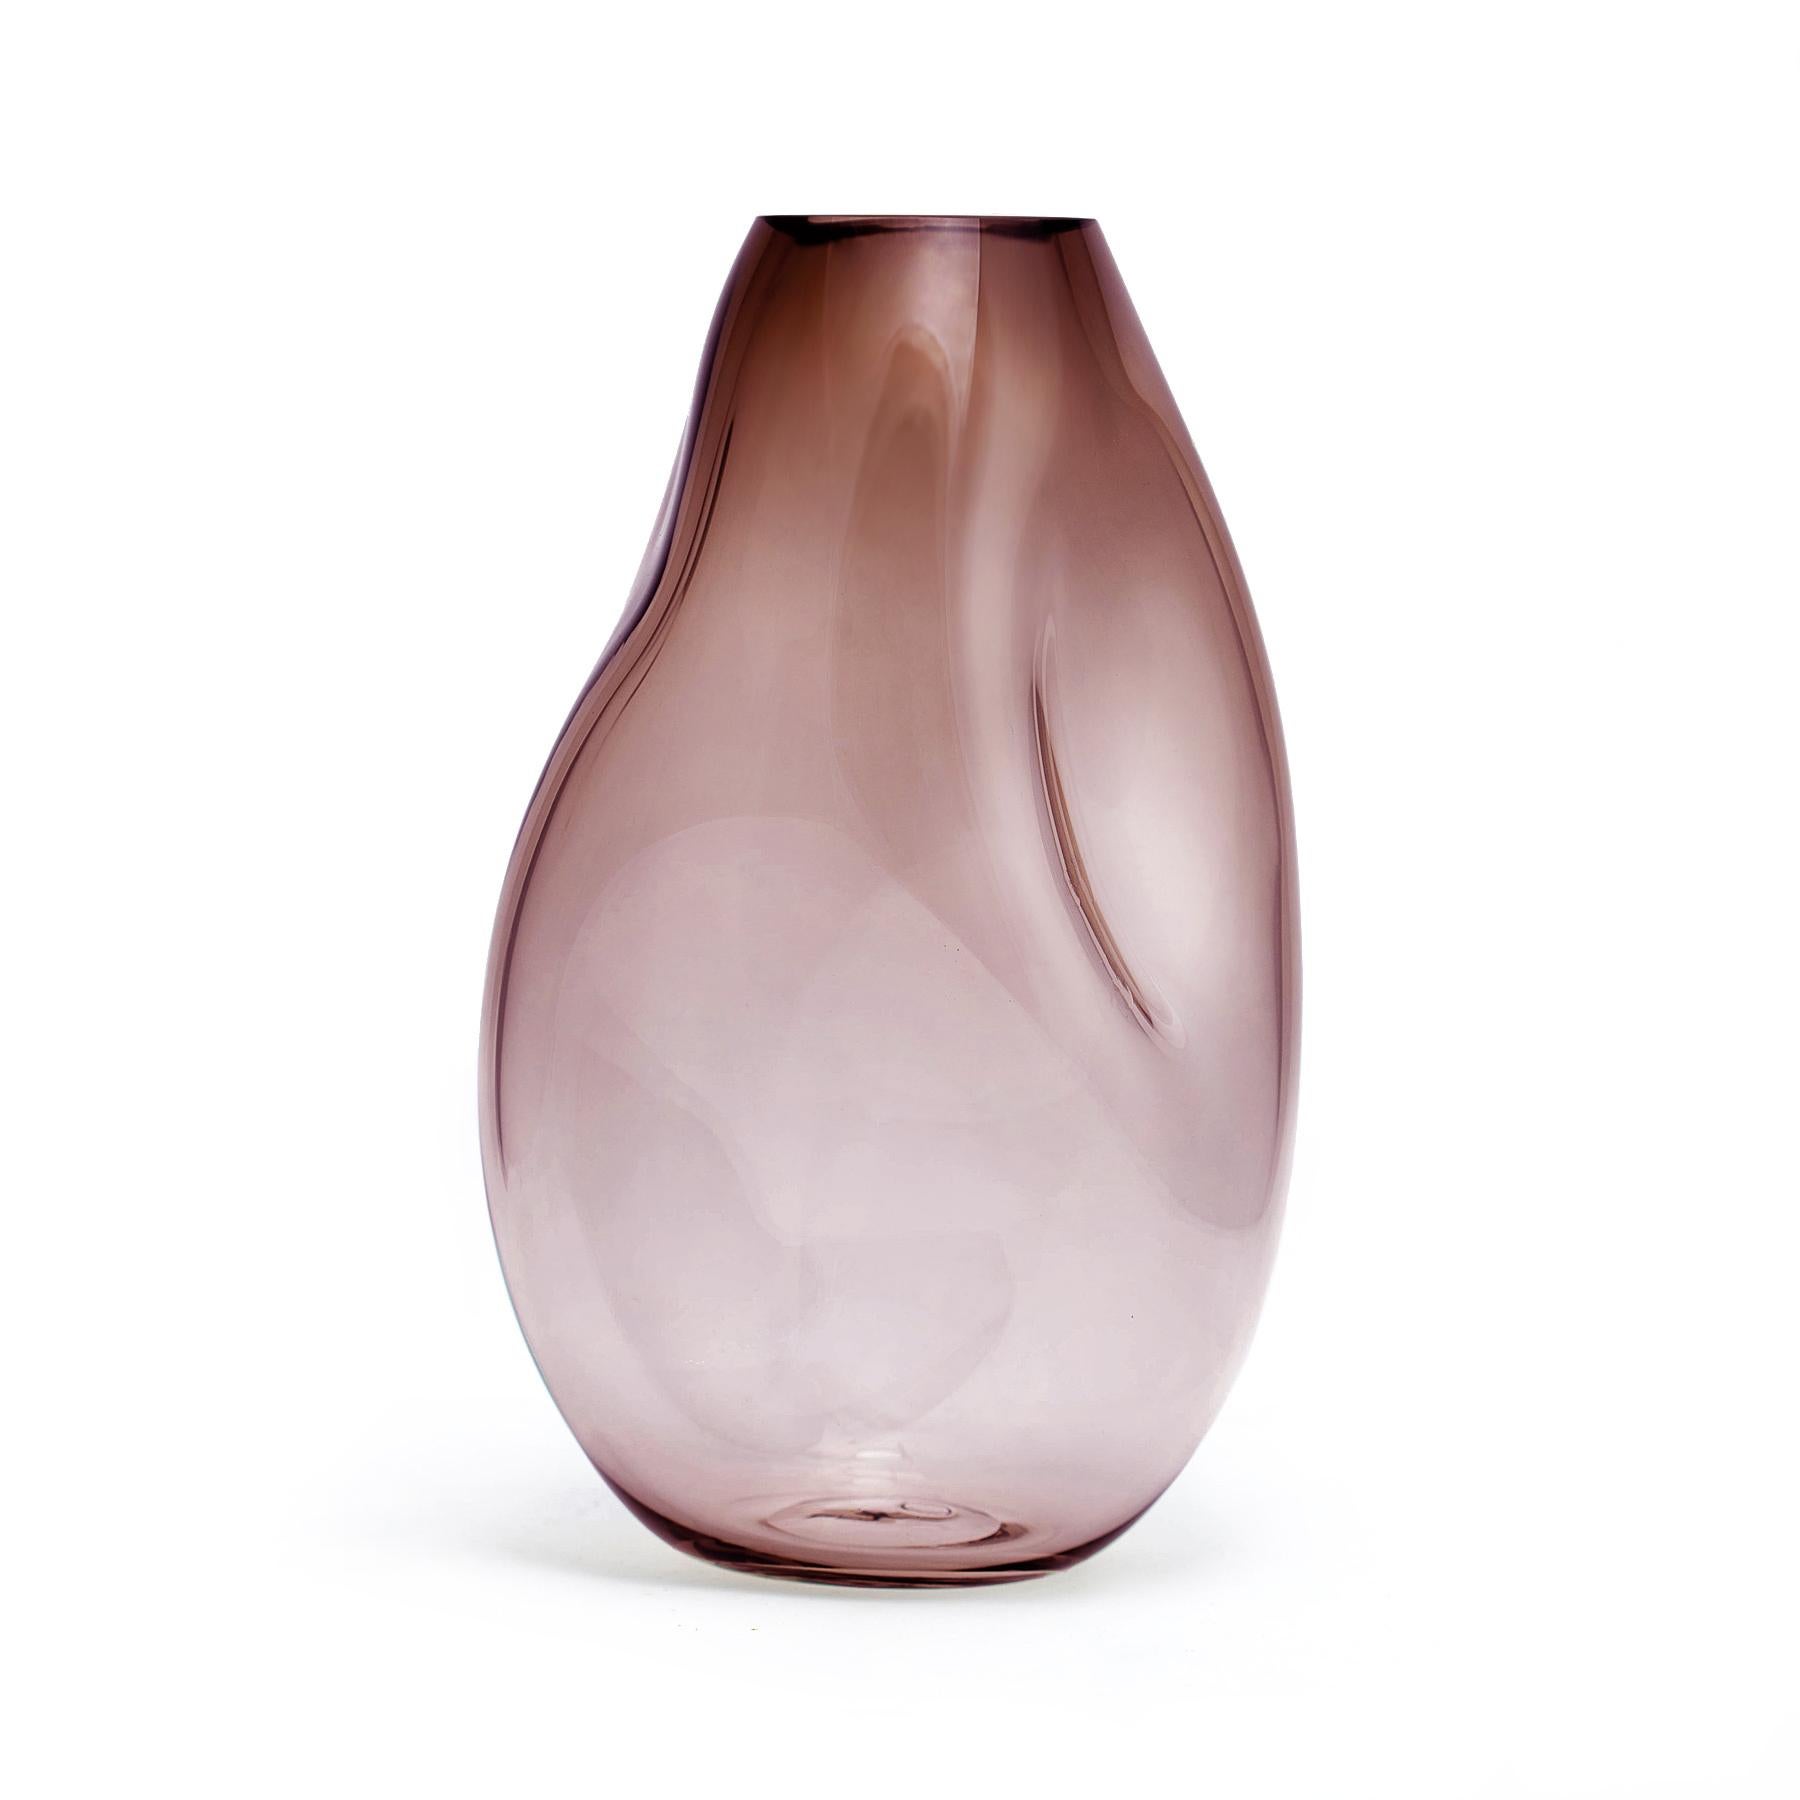 Supernova IV silver smoke red L vase by Eloa.
No UL listed 
Material: glass
Dimensions: D 15 x W 17 x H 41 cm.
Also available in different colours and dimensions.

Supernova is a collection of vases and bowls that, though they don‘t